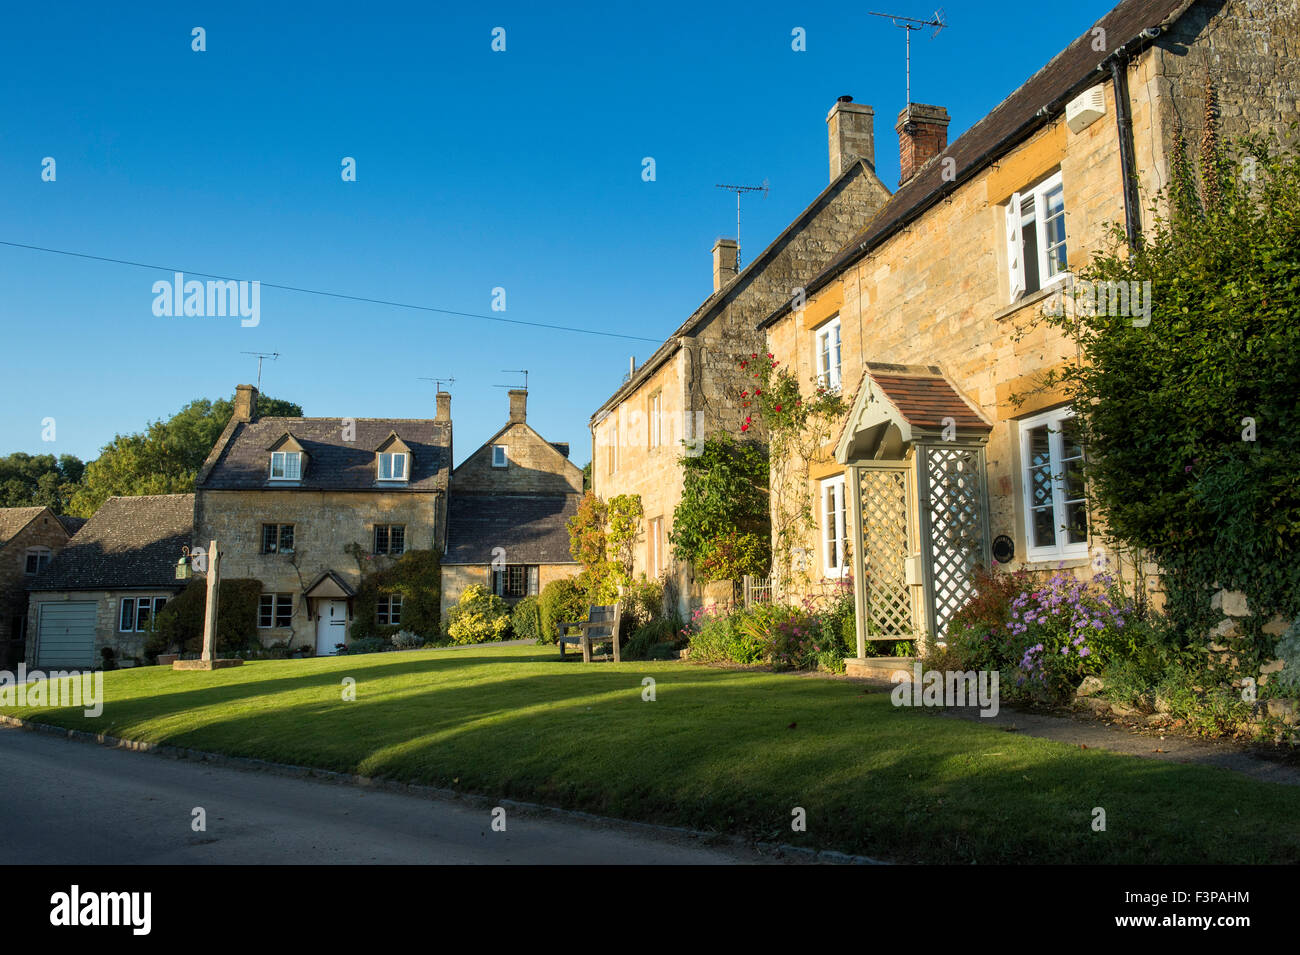 Cotswold cottages in Stanton village, Cotswolds, Gloucestershire, England Stock Photo